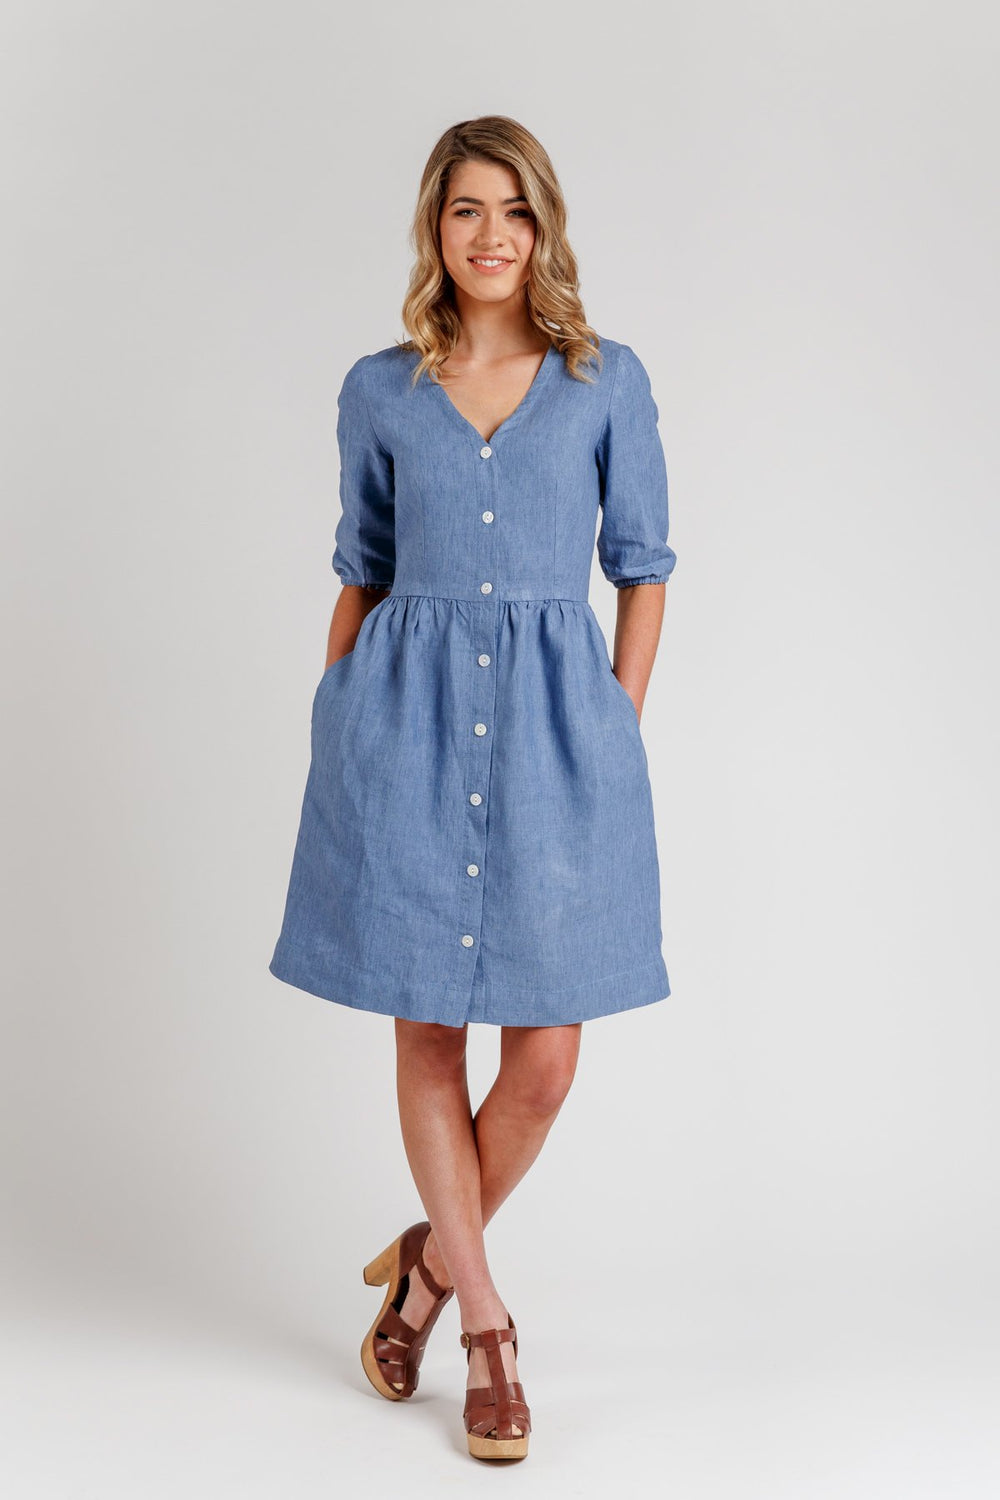 Woman wearing the Darling Ranges Dress sewing pattern from Megan Nielsen on The Fold Line. A shirt dress pattern made in silk, crepe de chine, lightweight cottons (voile, batiste, lawn, chambray), lightweight linen and rayon fabrics, featuring a V-neck, b